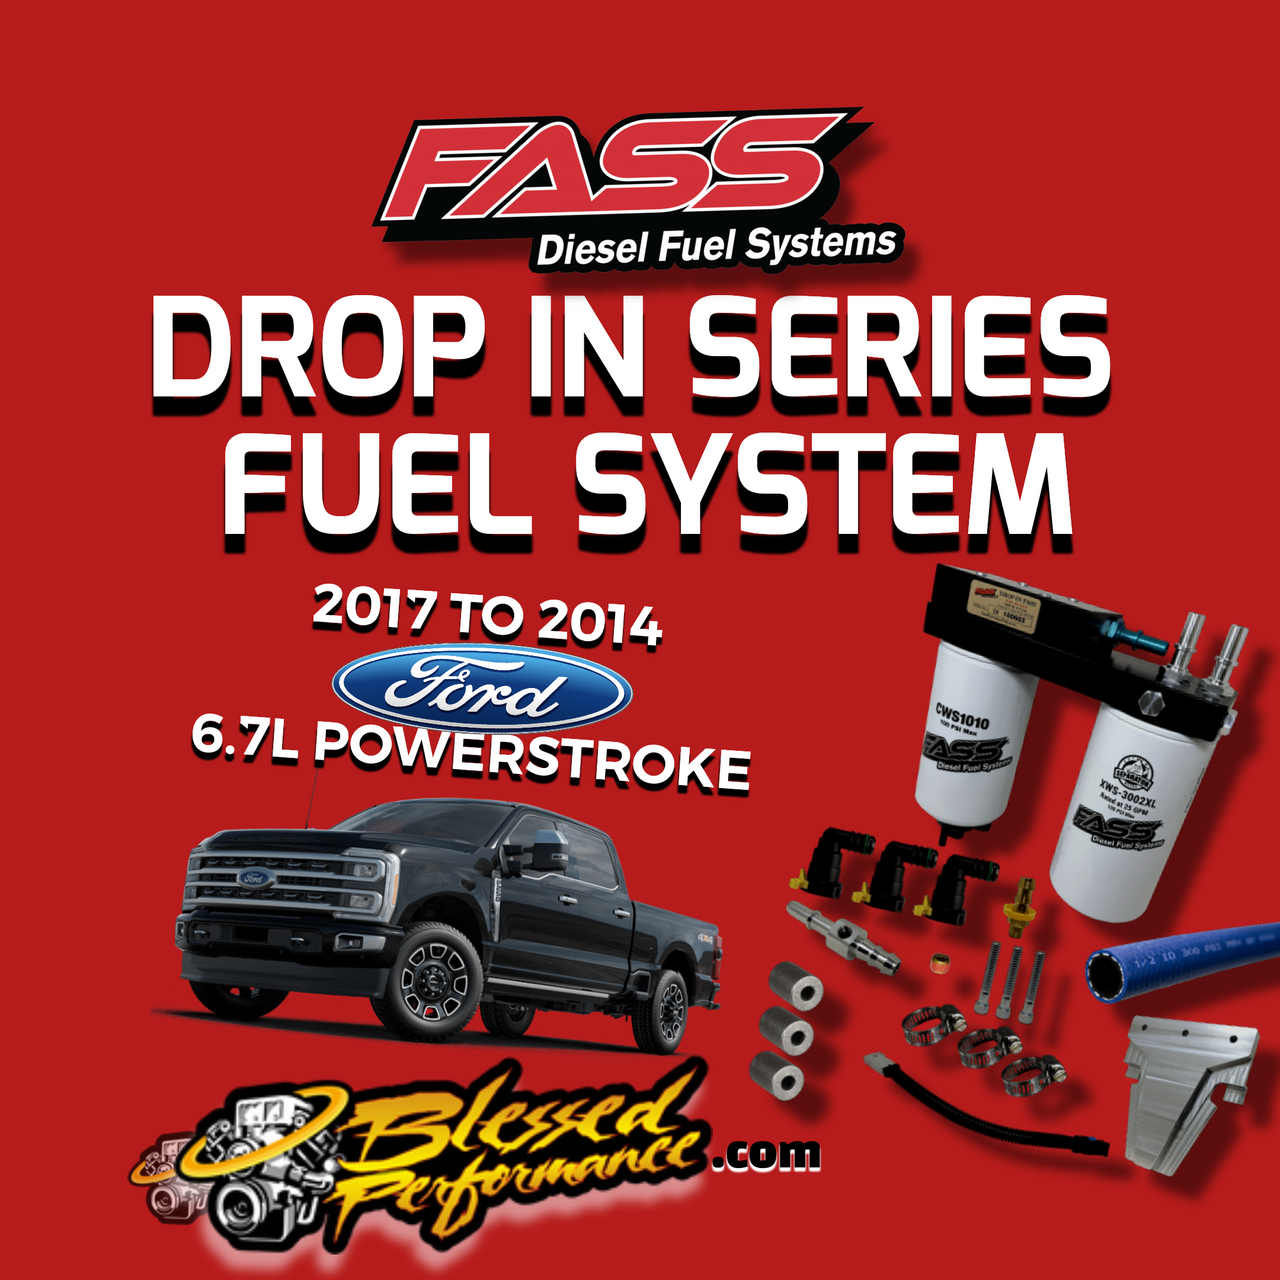 FASS Fuel Systems Drop-In Series Diesel Fuel System for 2017 to 2023 Ford 6.7L Powerstroke (DIFSFRD1001) AD View